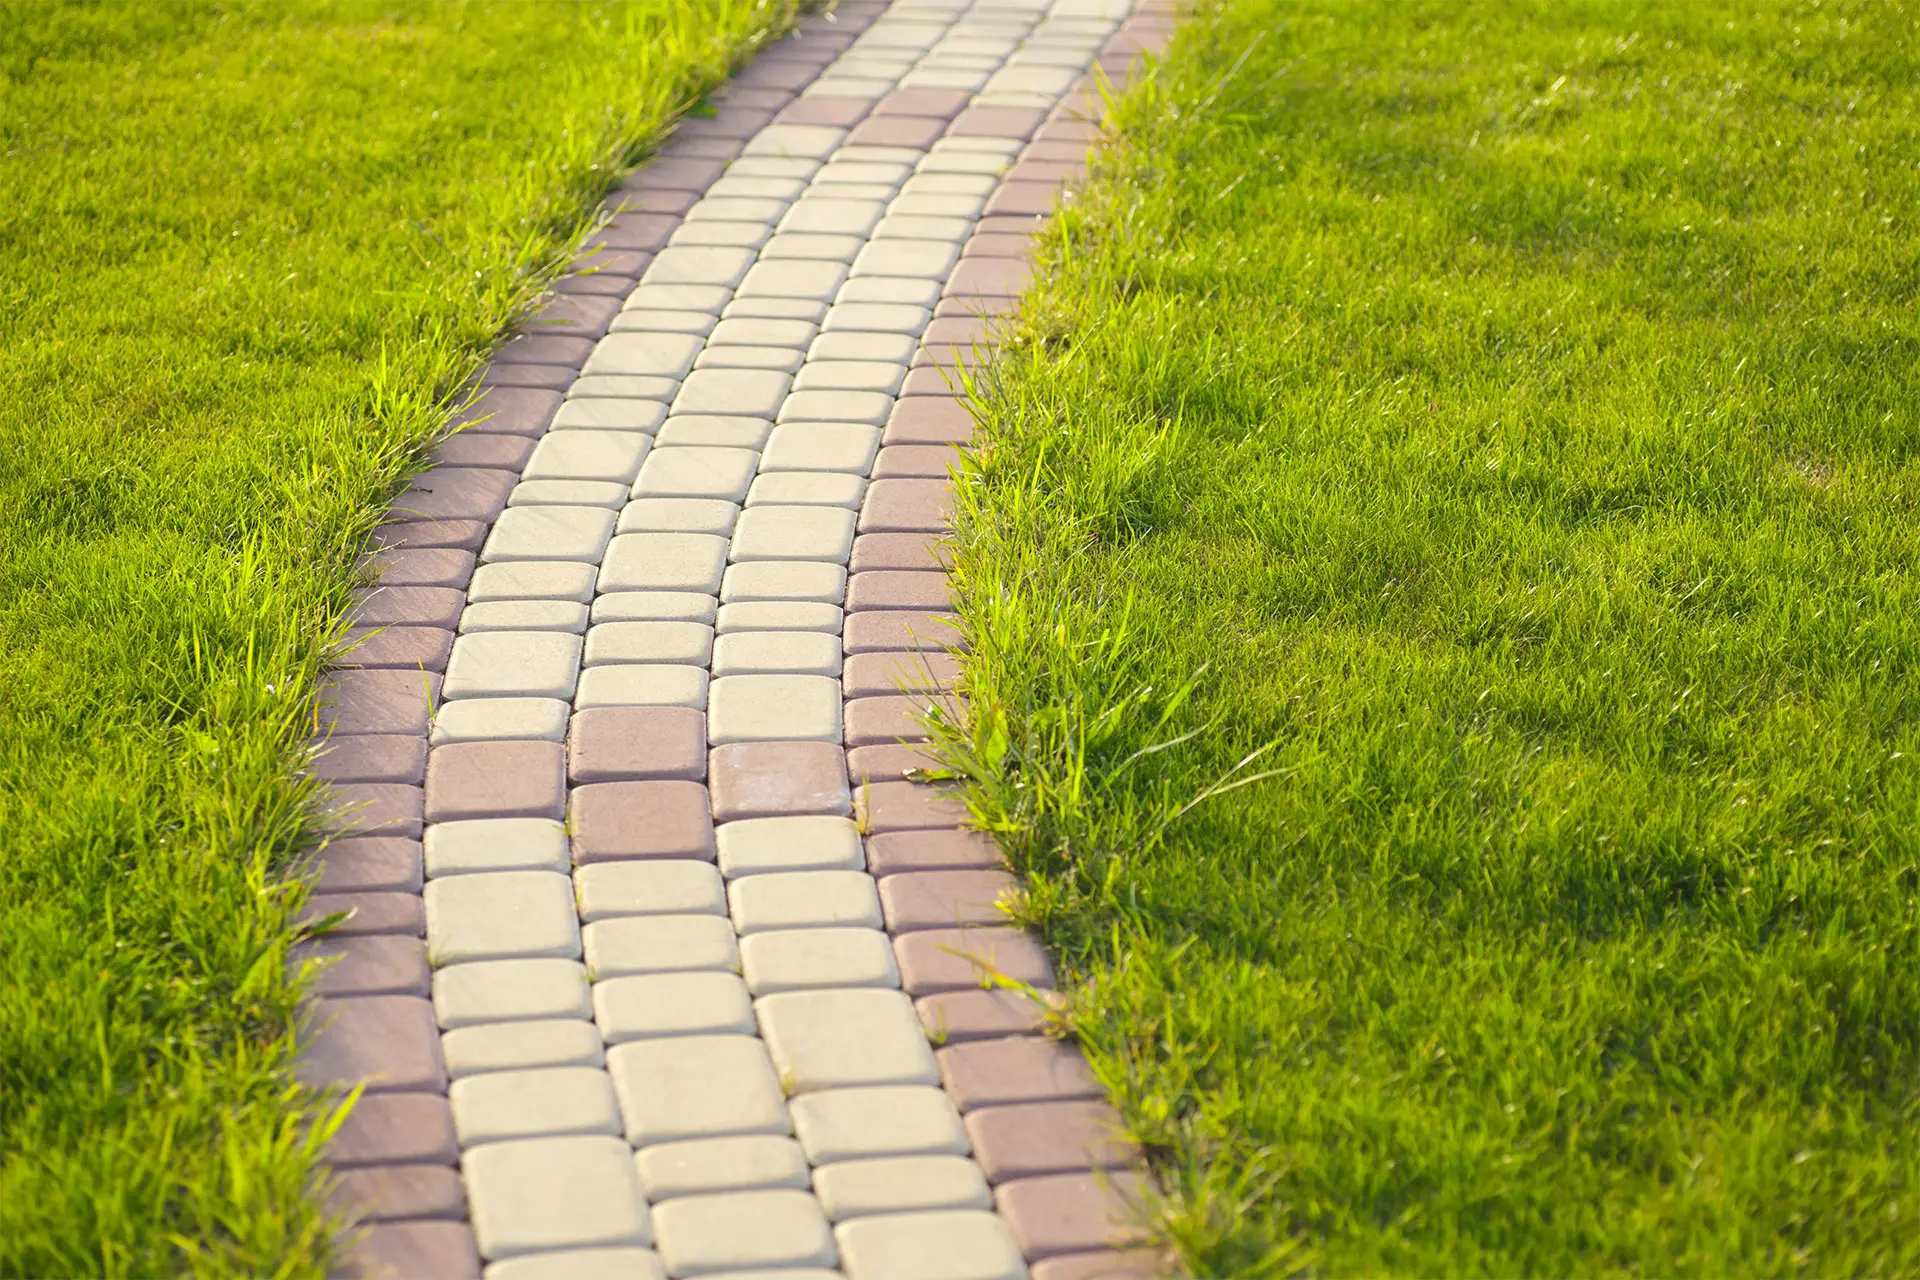 a charming walkway crafted with interlocking brick pavers, leading through a tranquil garden setting.